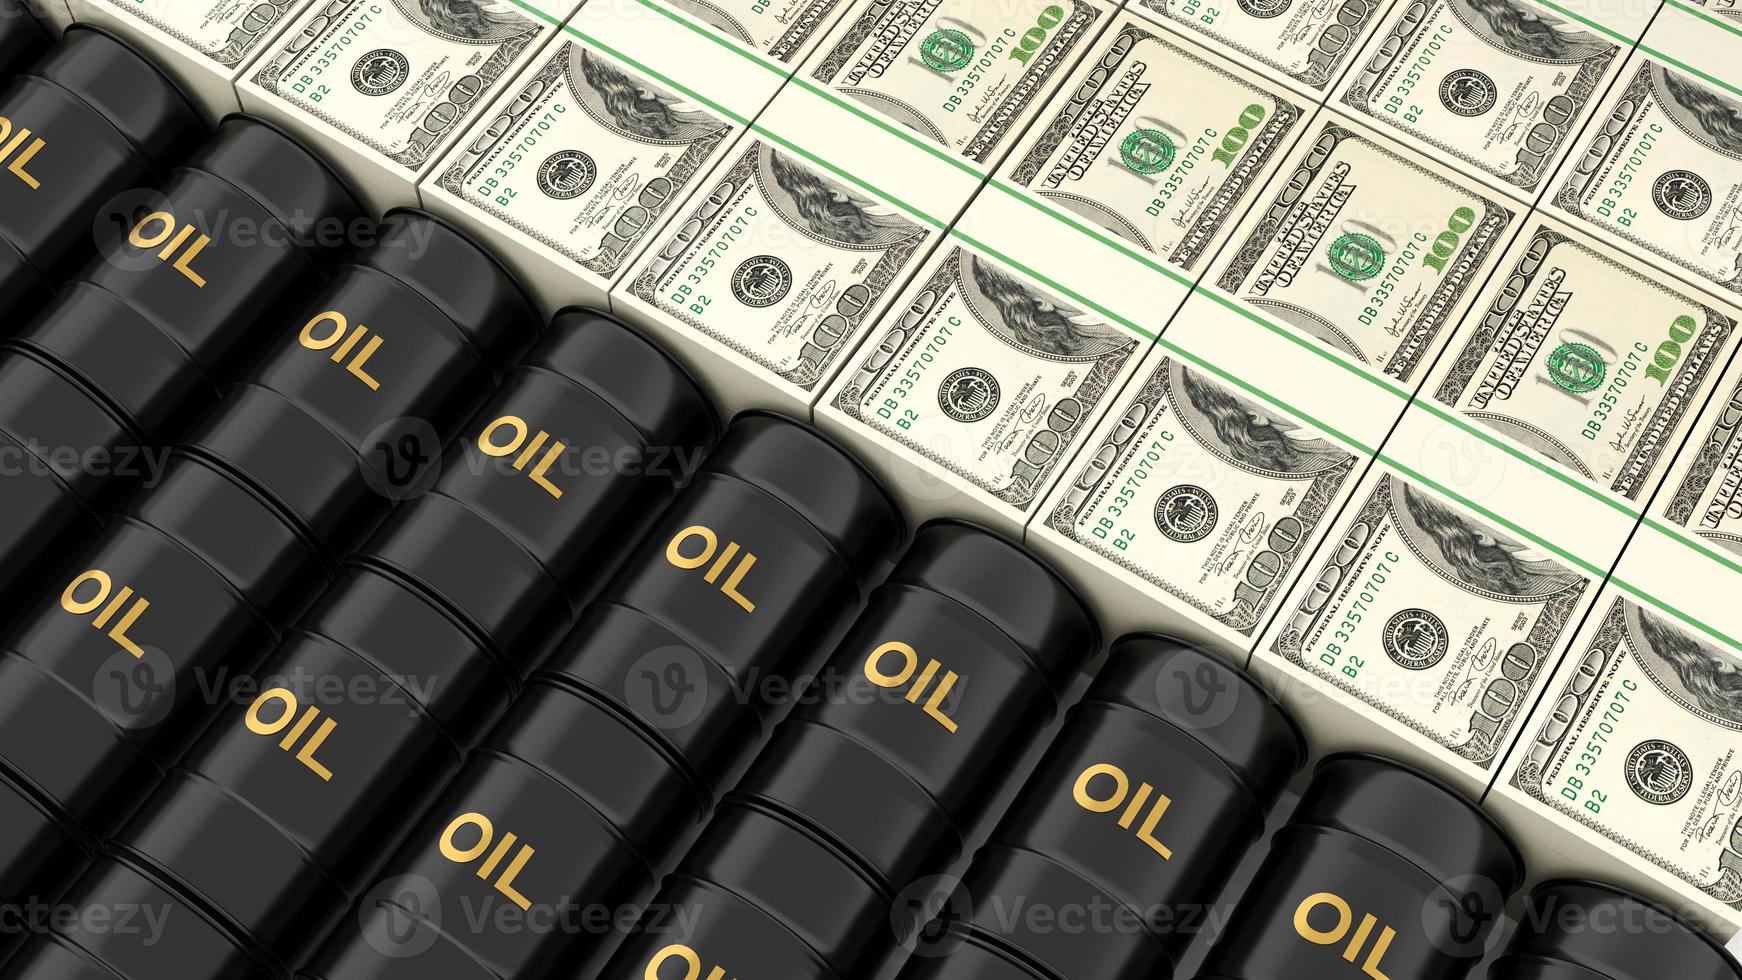 Oil tank and cash,price of oil going up or down,Using US money to buy oil,Comparison between cash and oil,3d rendering photo